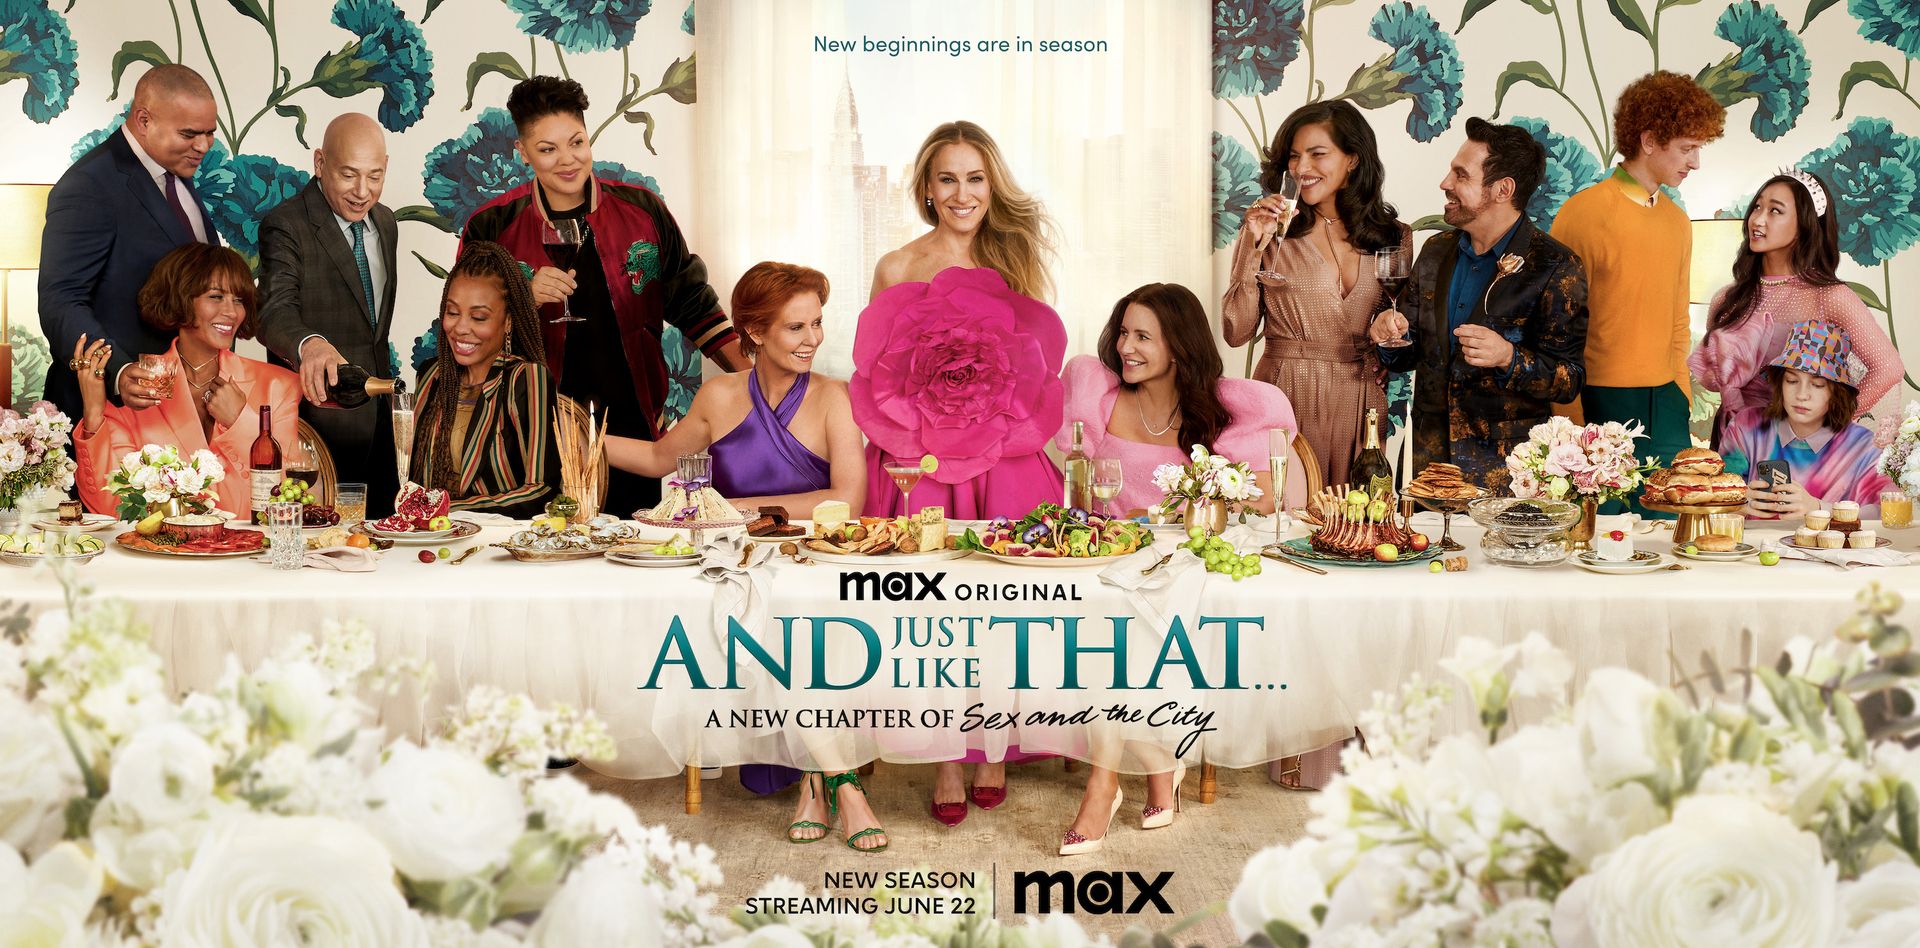 Season 2 Of And Just Like That - Season 2 of the Sex and the City Reboot